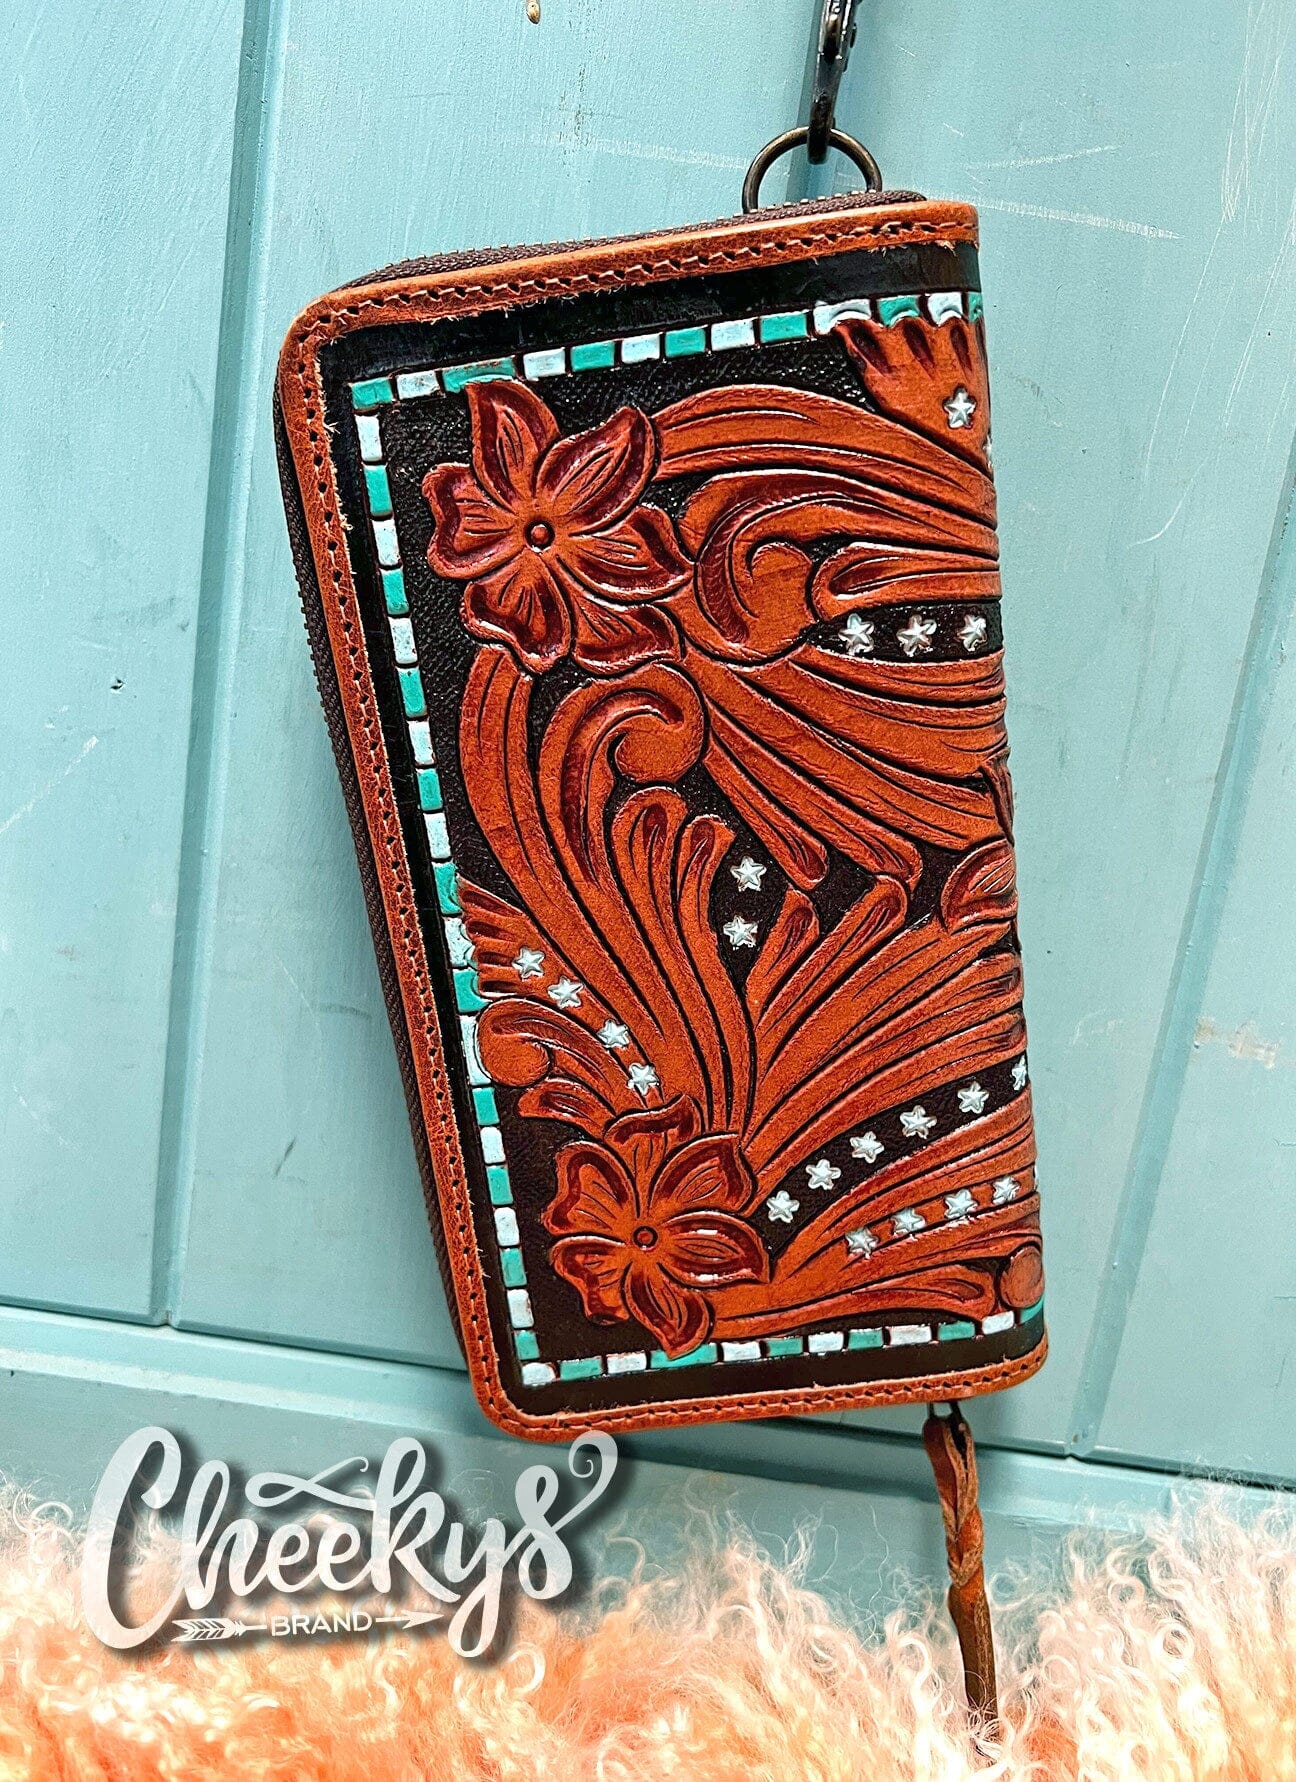 Star Line Tooled Turquoise Wallet/Clutch Cheekys Brand 